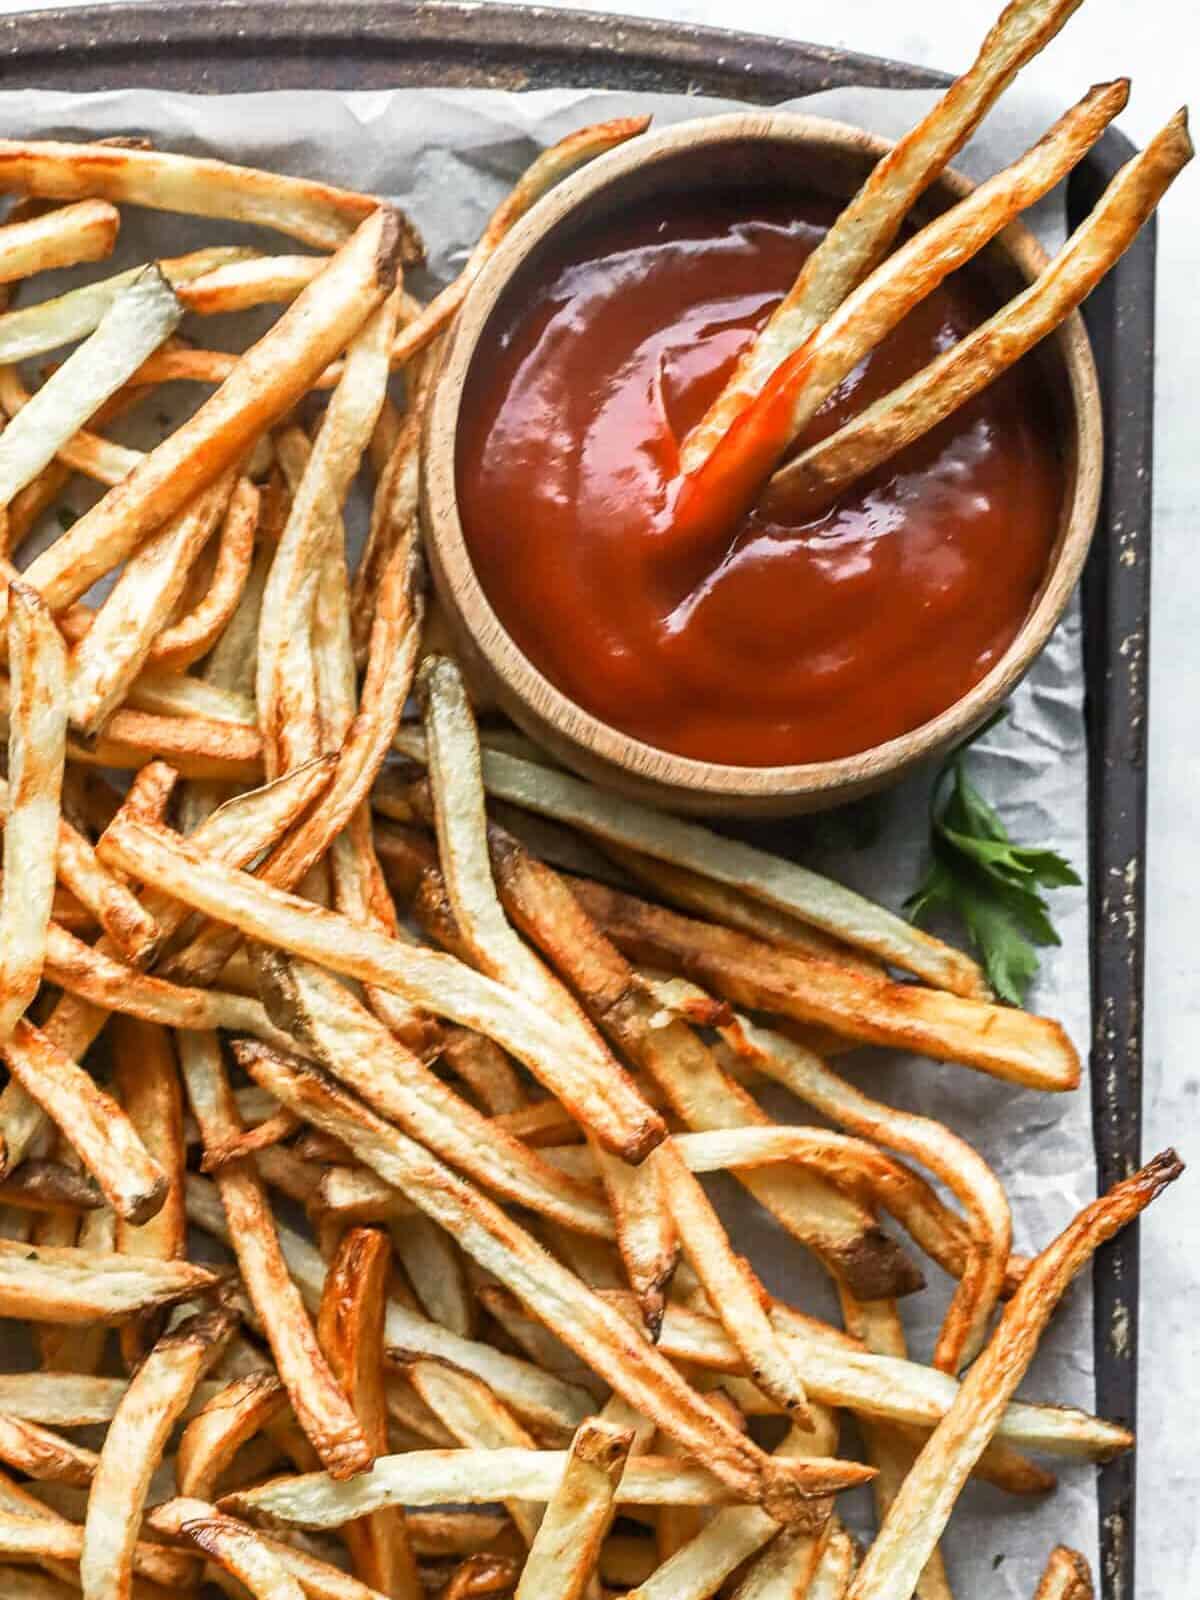 partial overhead view of air fryer french fries on a baking sheet with a cup of ketchup.